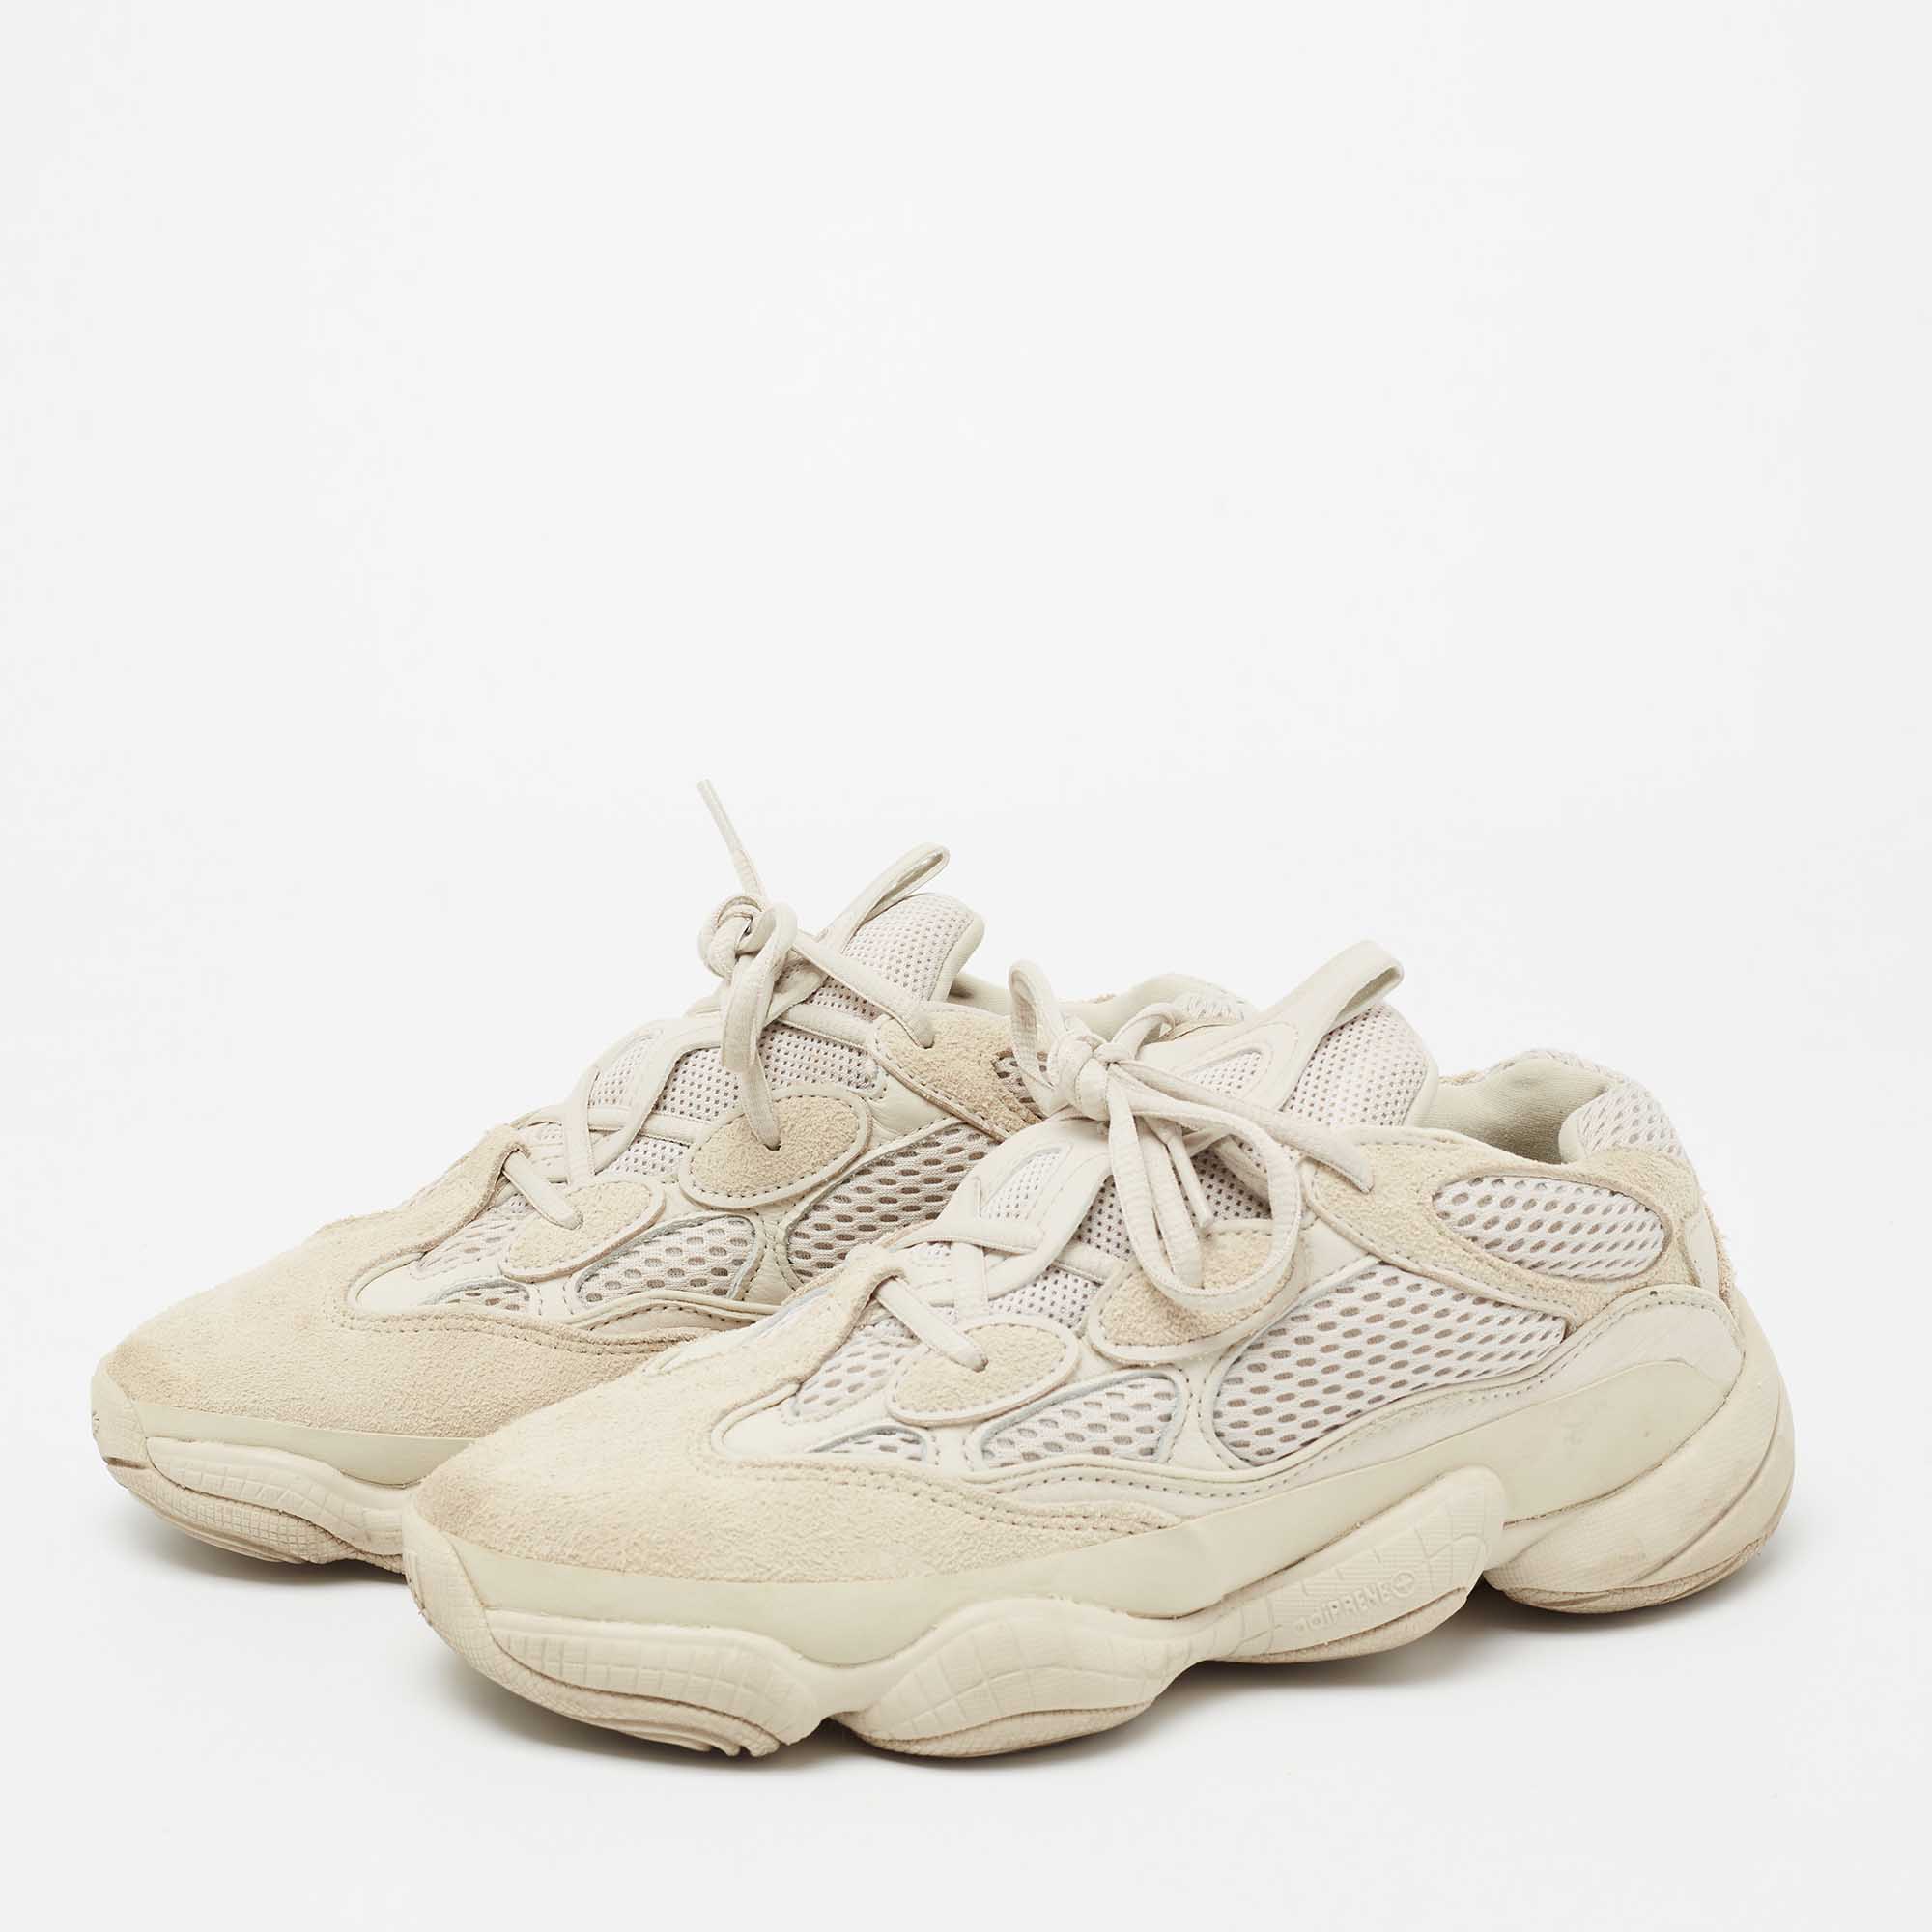 

Yeezy x Adidas Beige Mesh And Suede Yeezy 500 Blush Sneakers Size  1/3